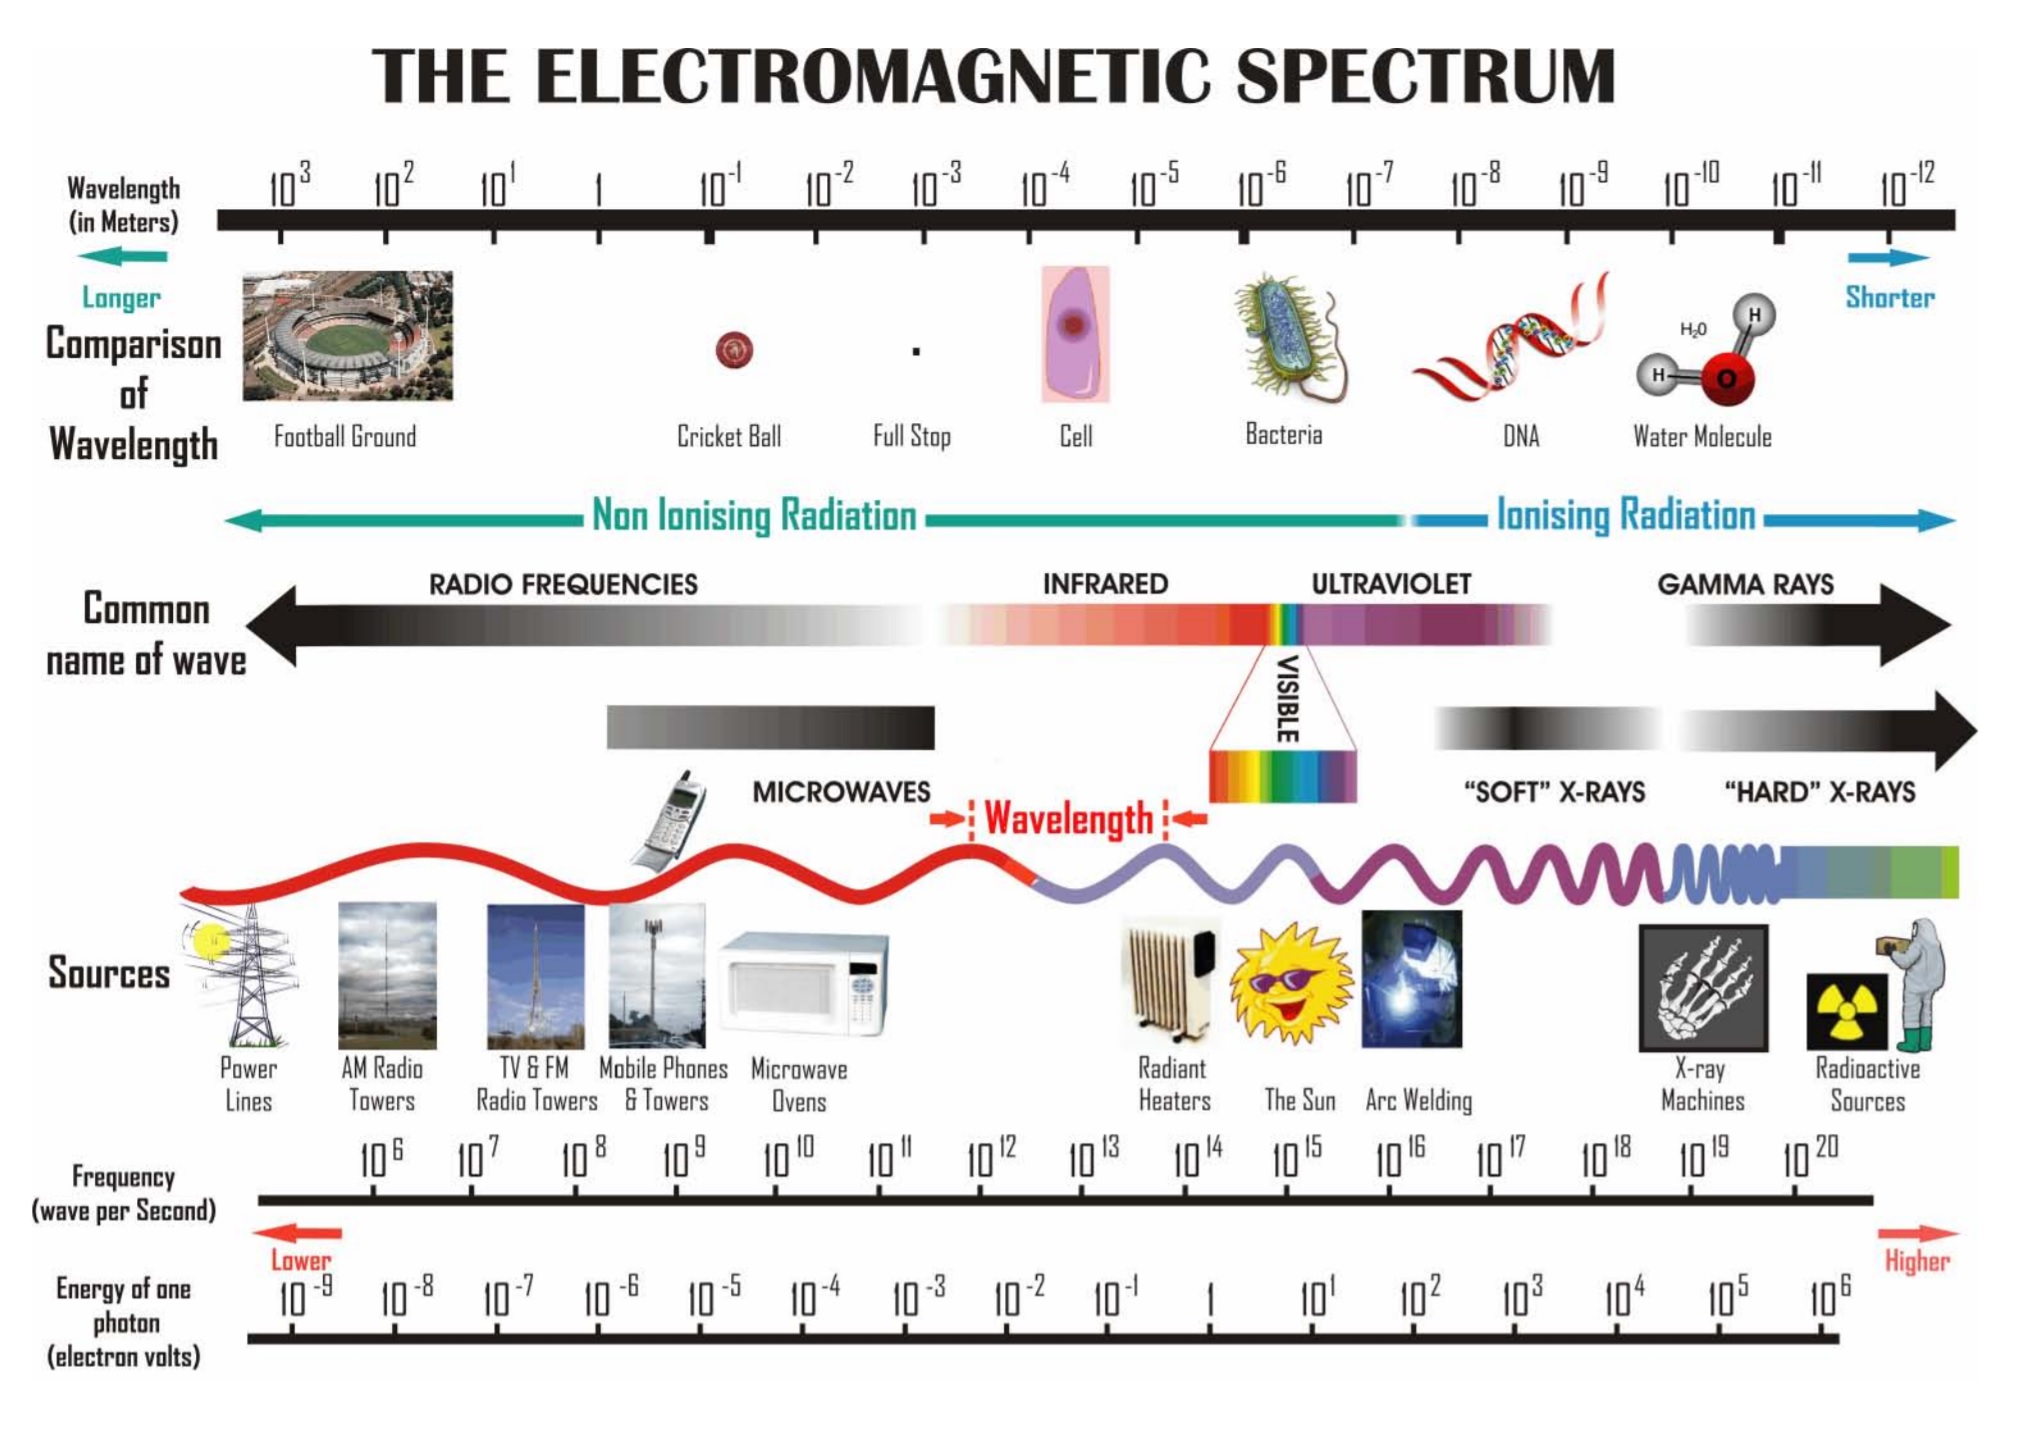 Frequencies along the electromagnetic spectrum. (Australian Radiation Protection and Nuclear Safety Agency/AUS GOV)